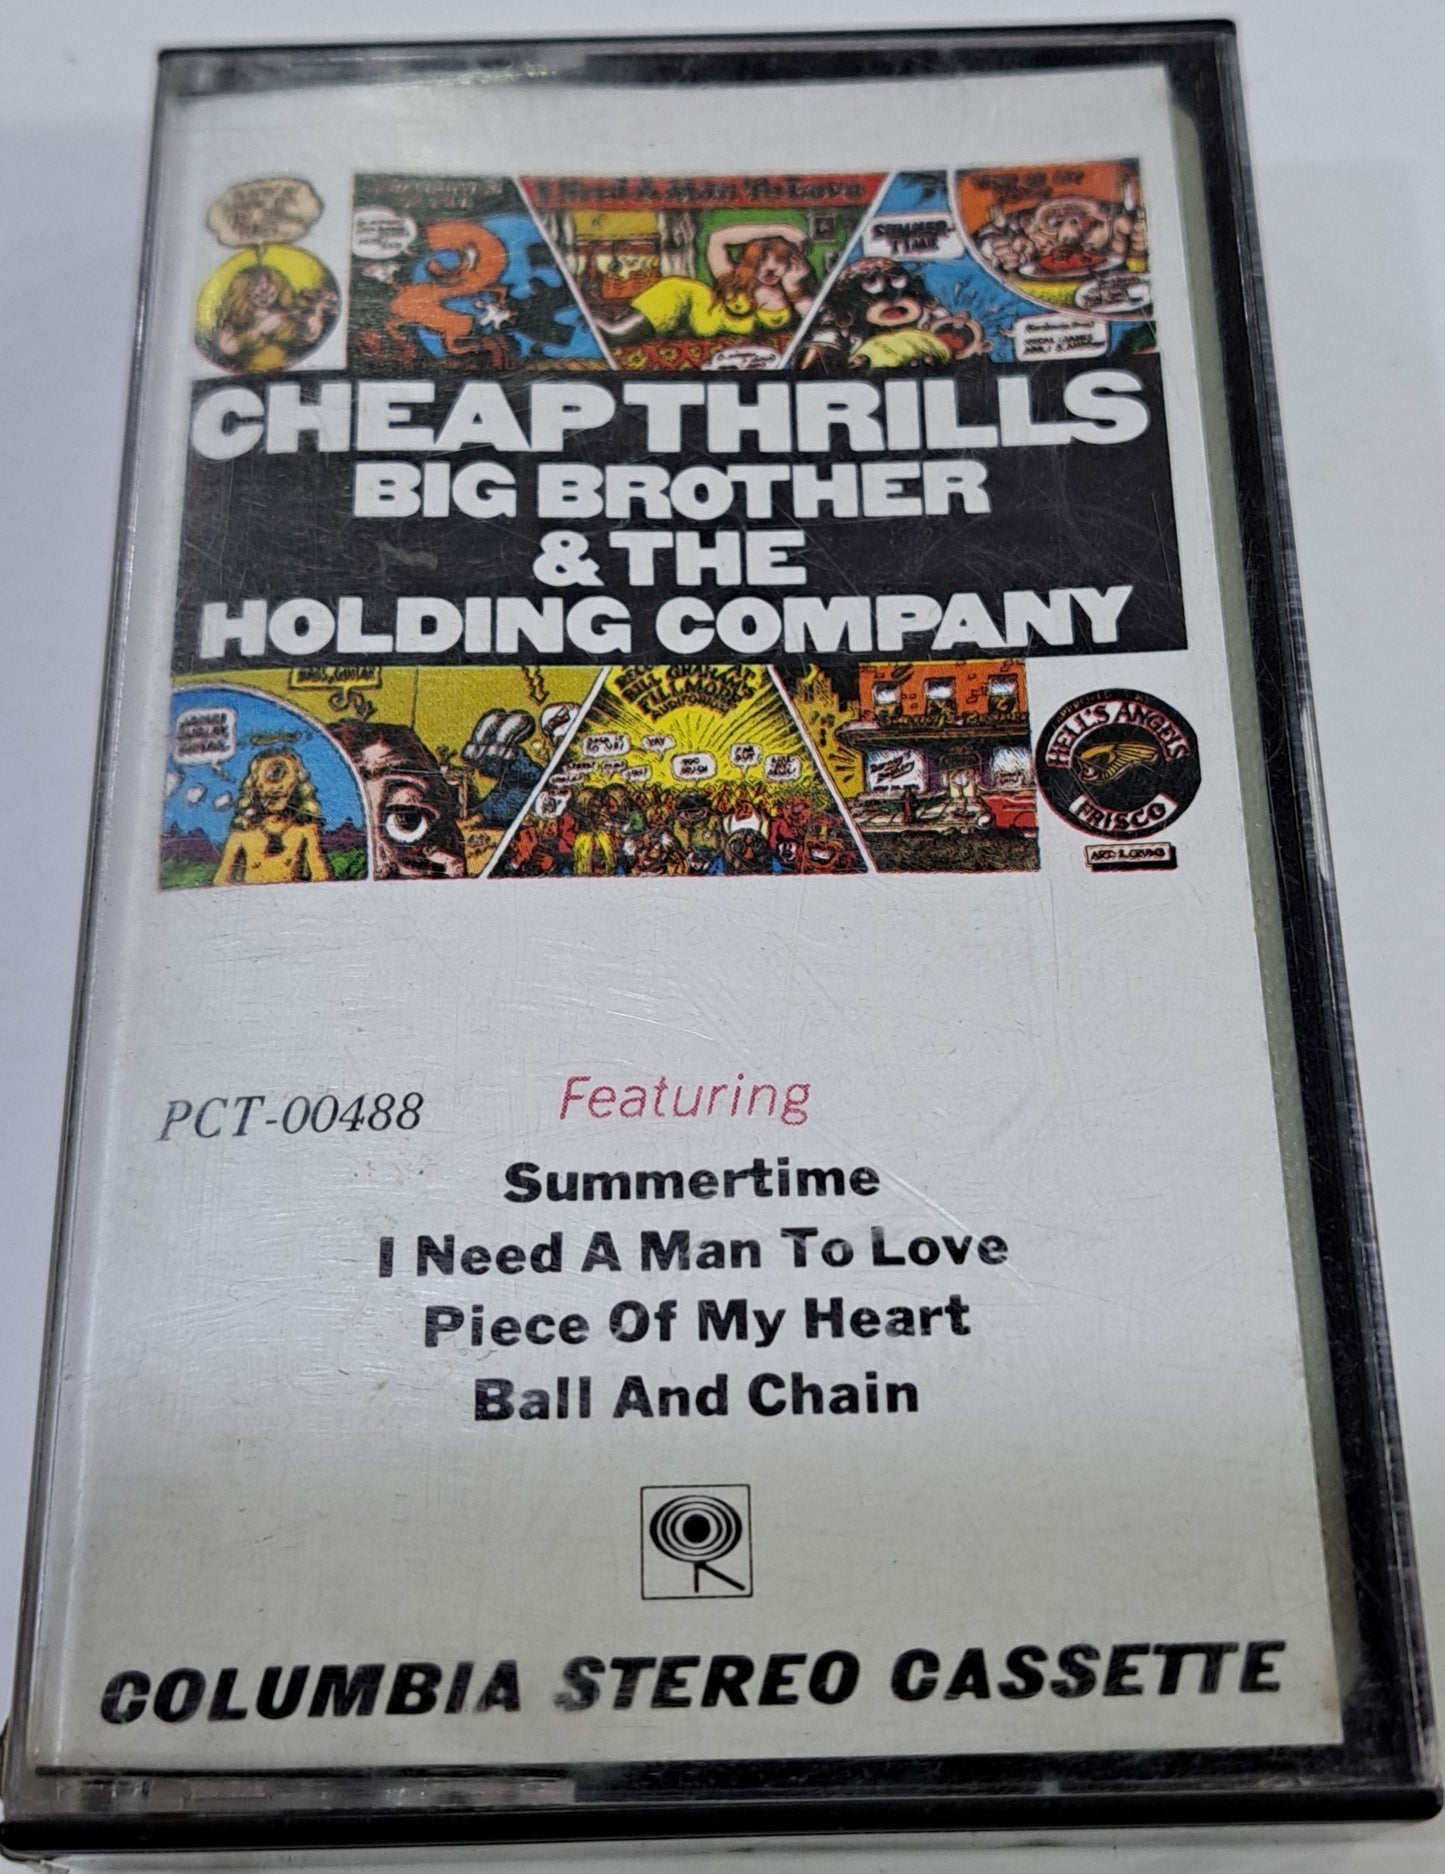 CHEAP THRILLS - BIG BROTHER & THE HOLDING COMPANY CASSETTE